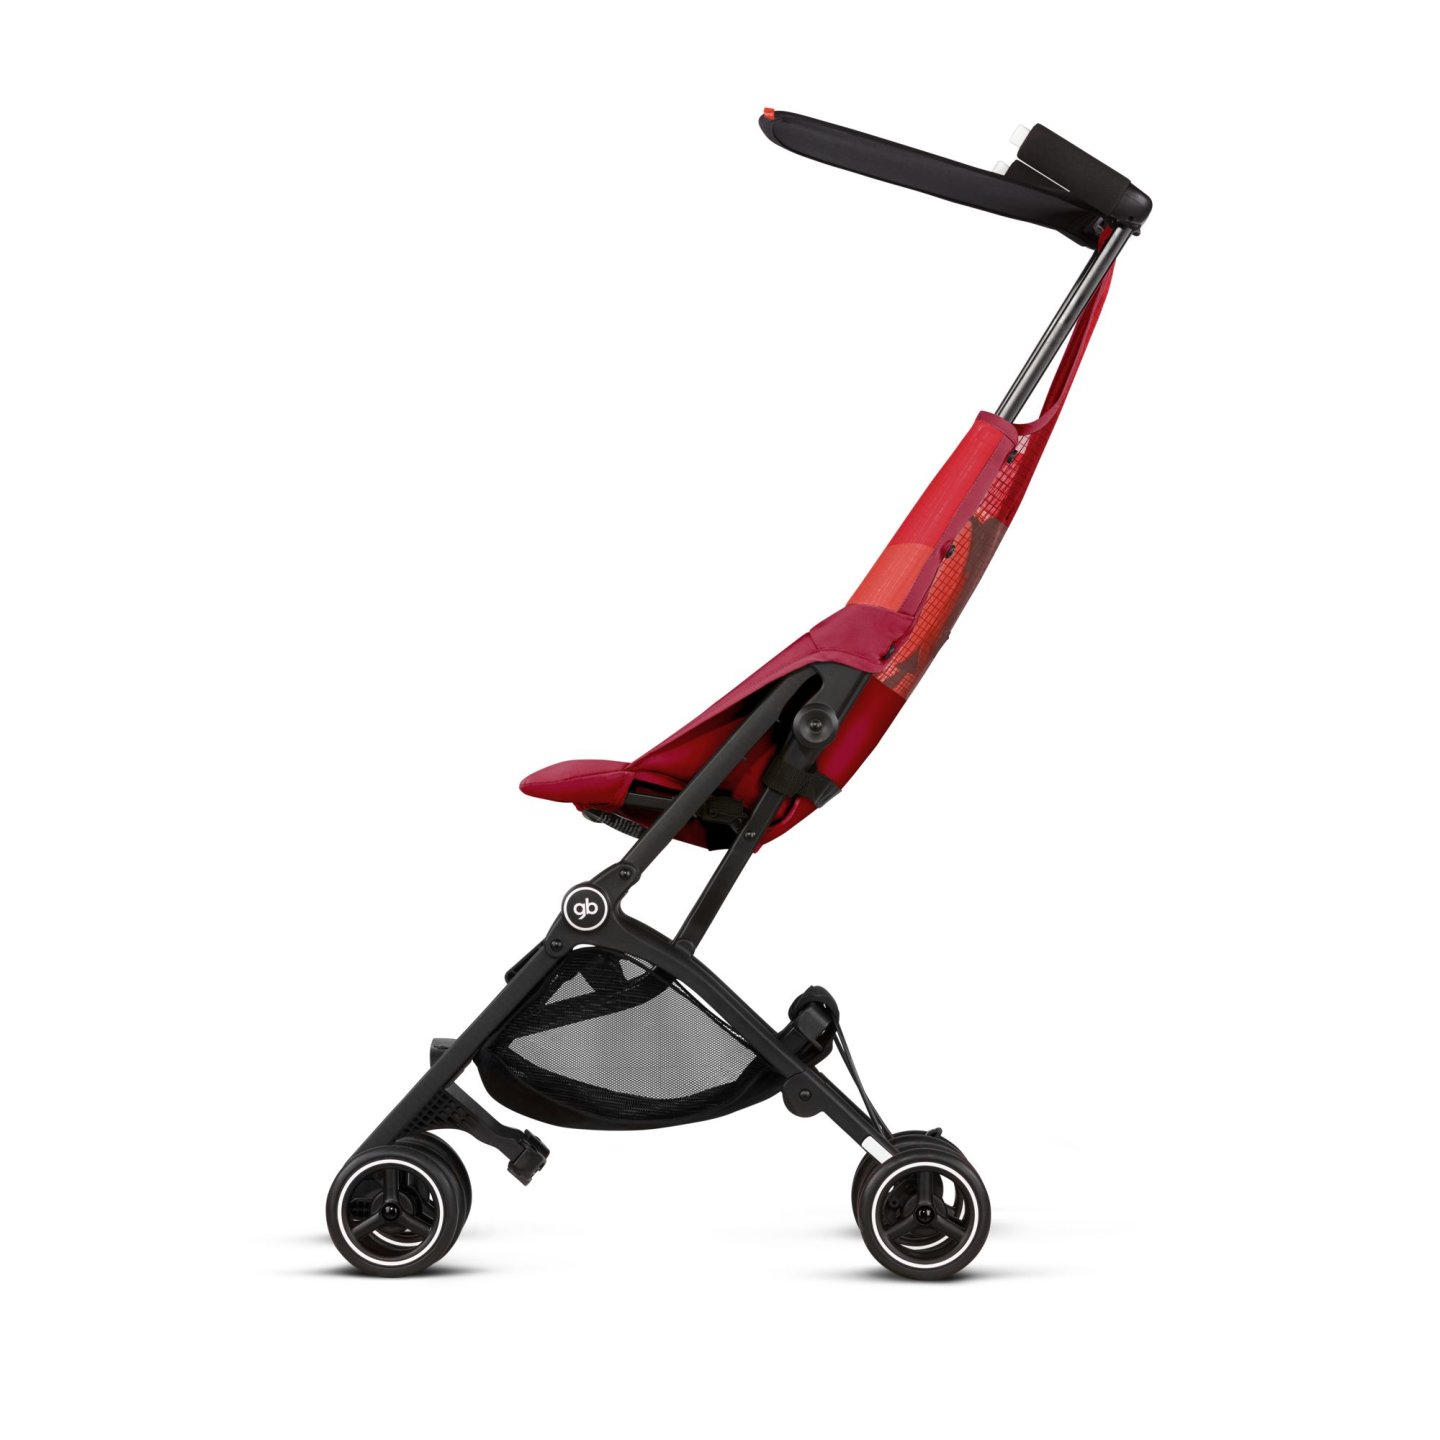 //images.gb-online.com/q_85,dn_72,h_1440/gbo/product-Pockit-Air-All-Terrain-Rose-Red-Featherlight-8620-8617-8589_p65ev1